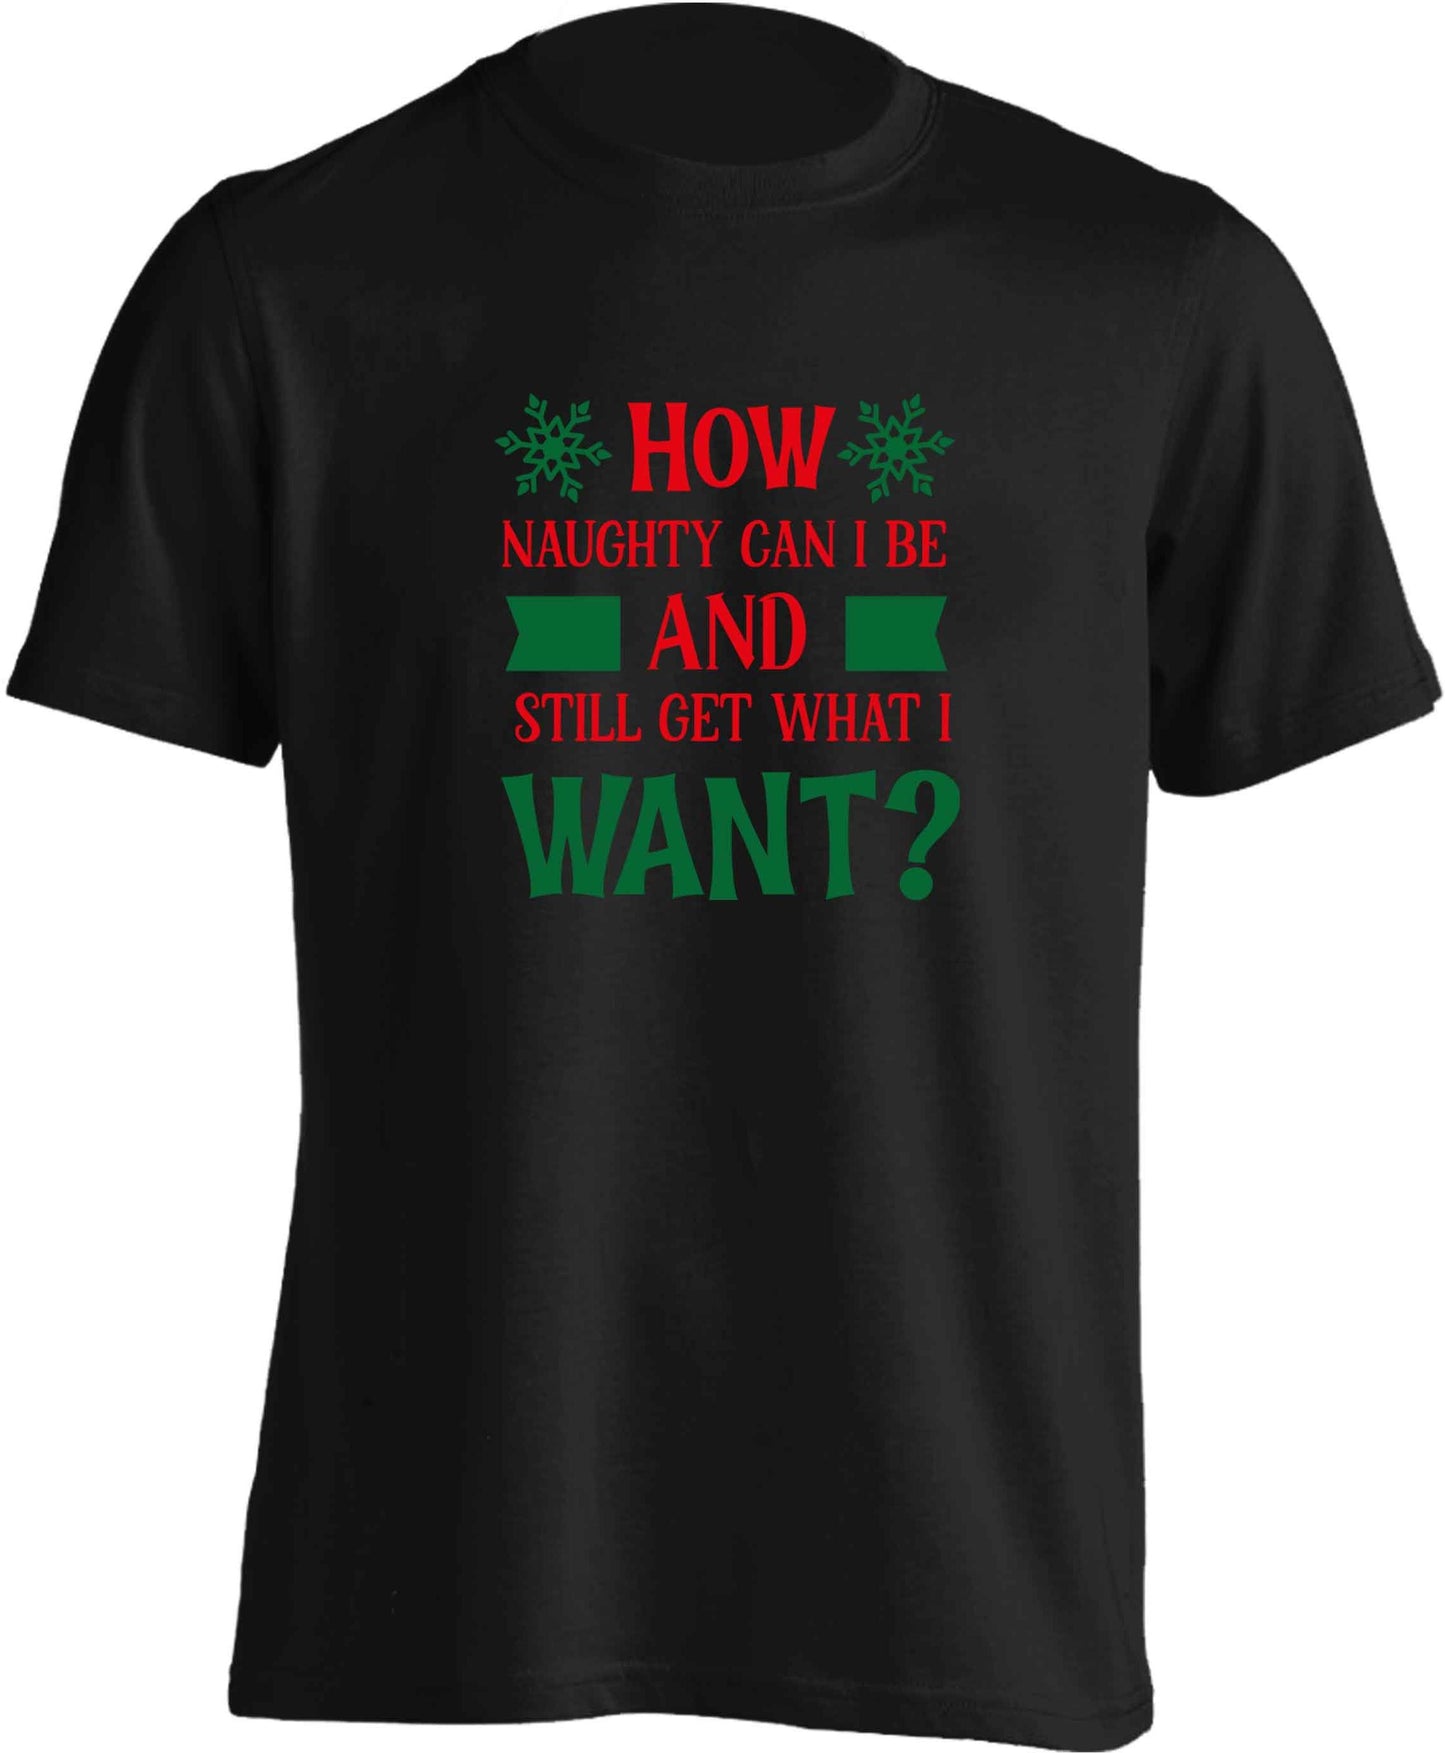 How naughty can I be and still get what I want? adults unisex black Tshirt 2XL